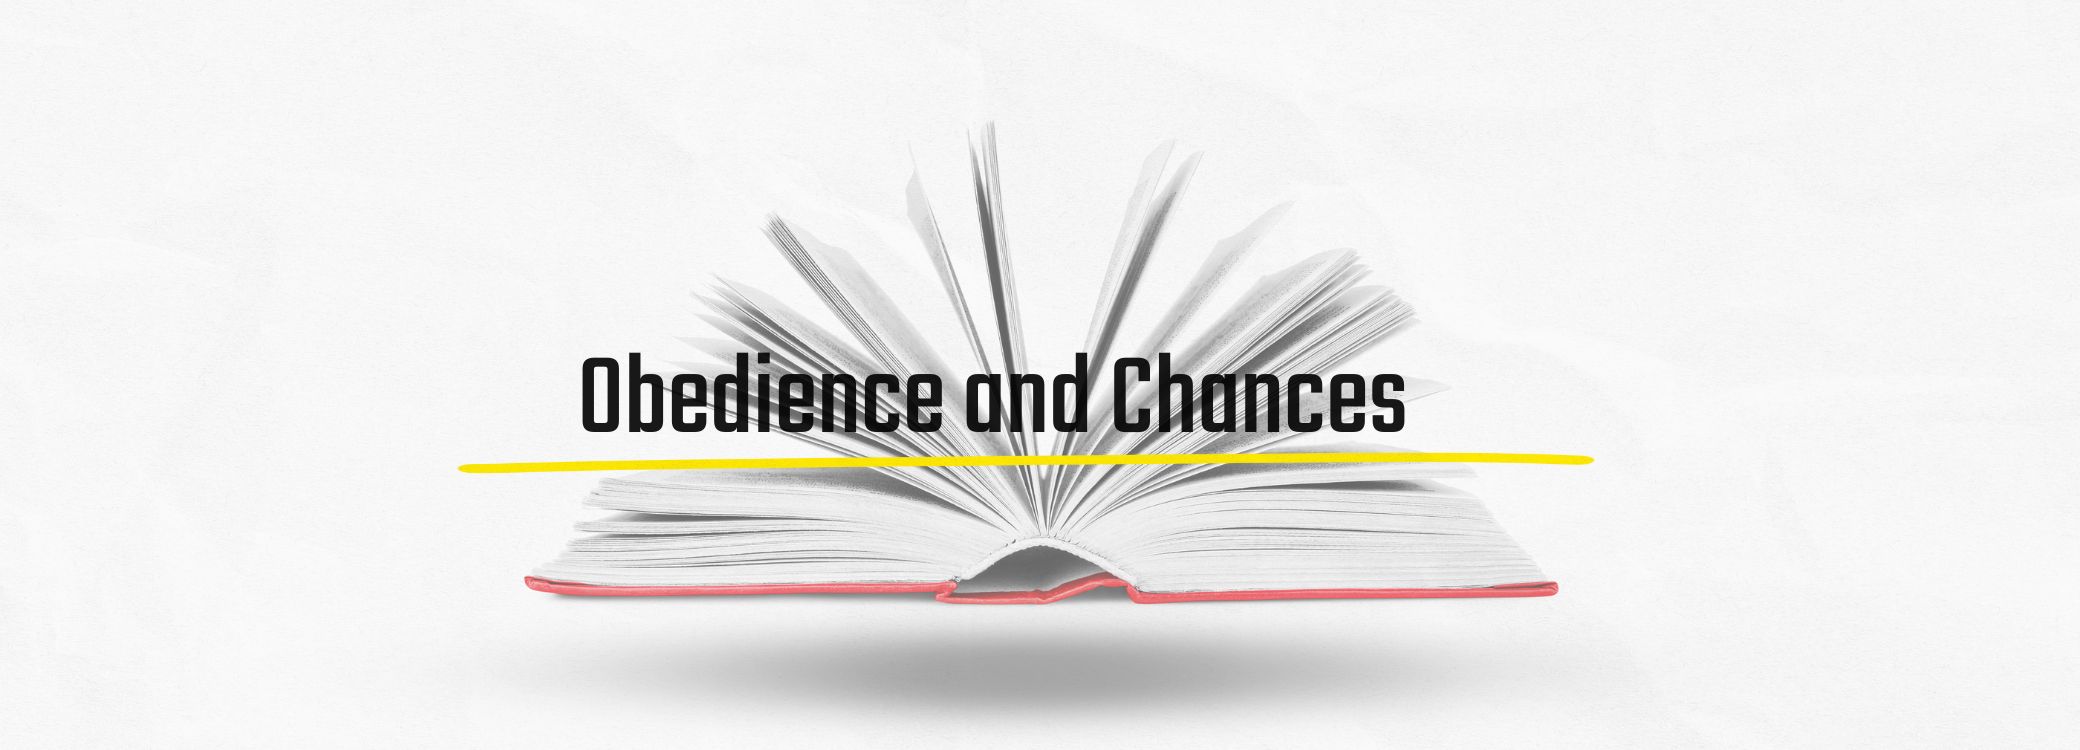 Obedience and Chances